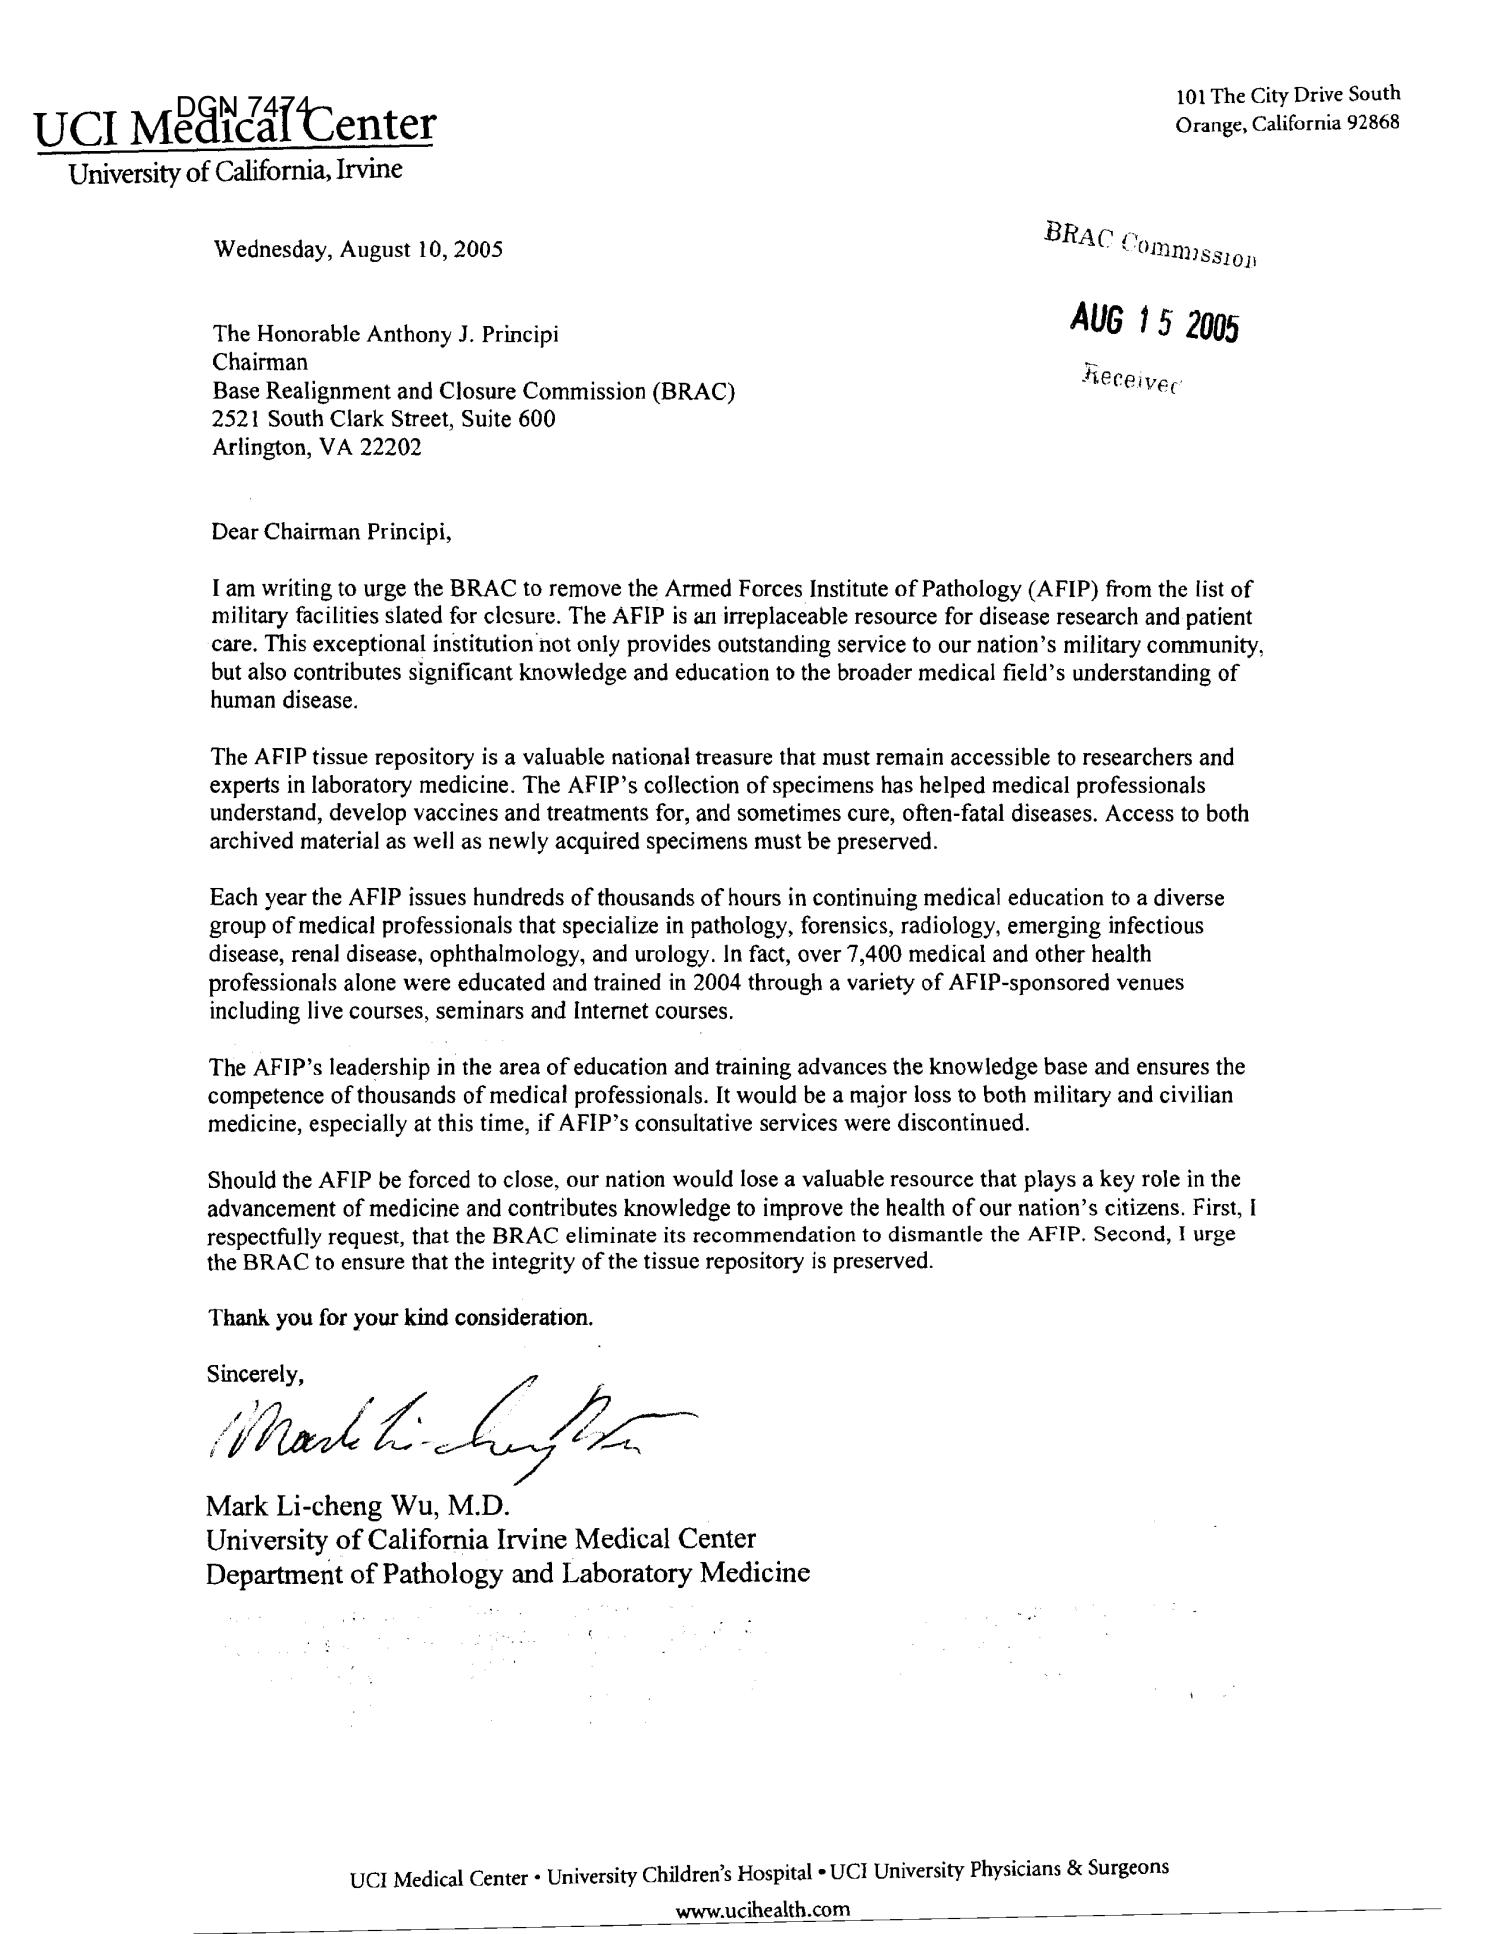 Executive Correspondence - Letter from Dr. Letter from Dr 